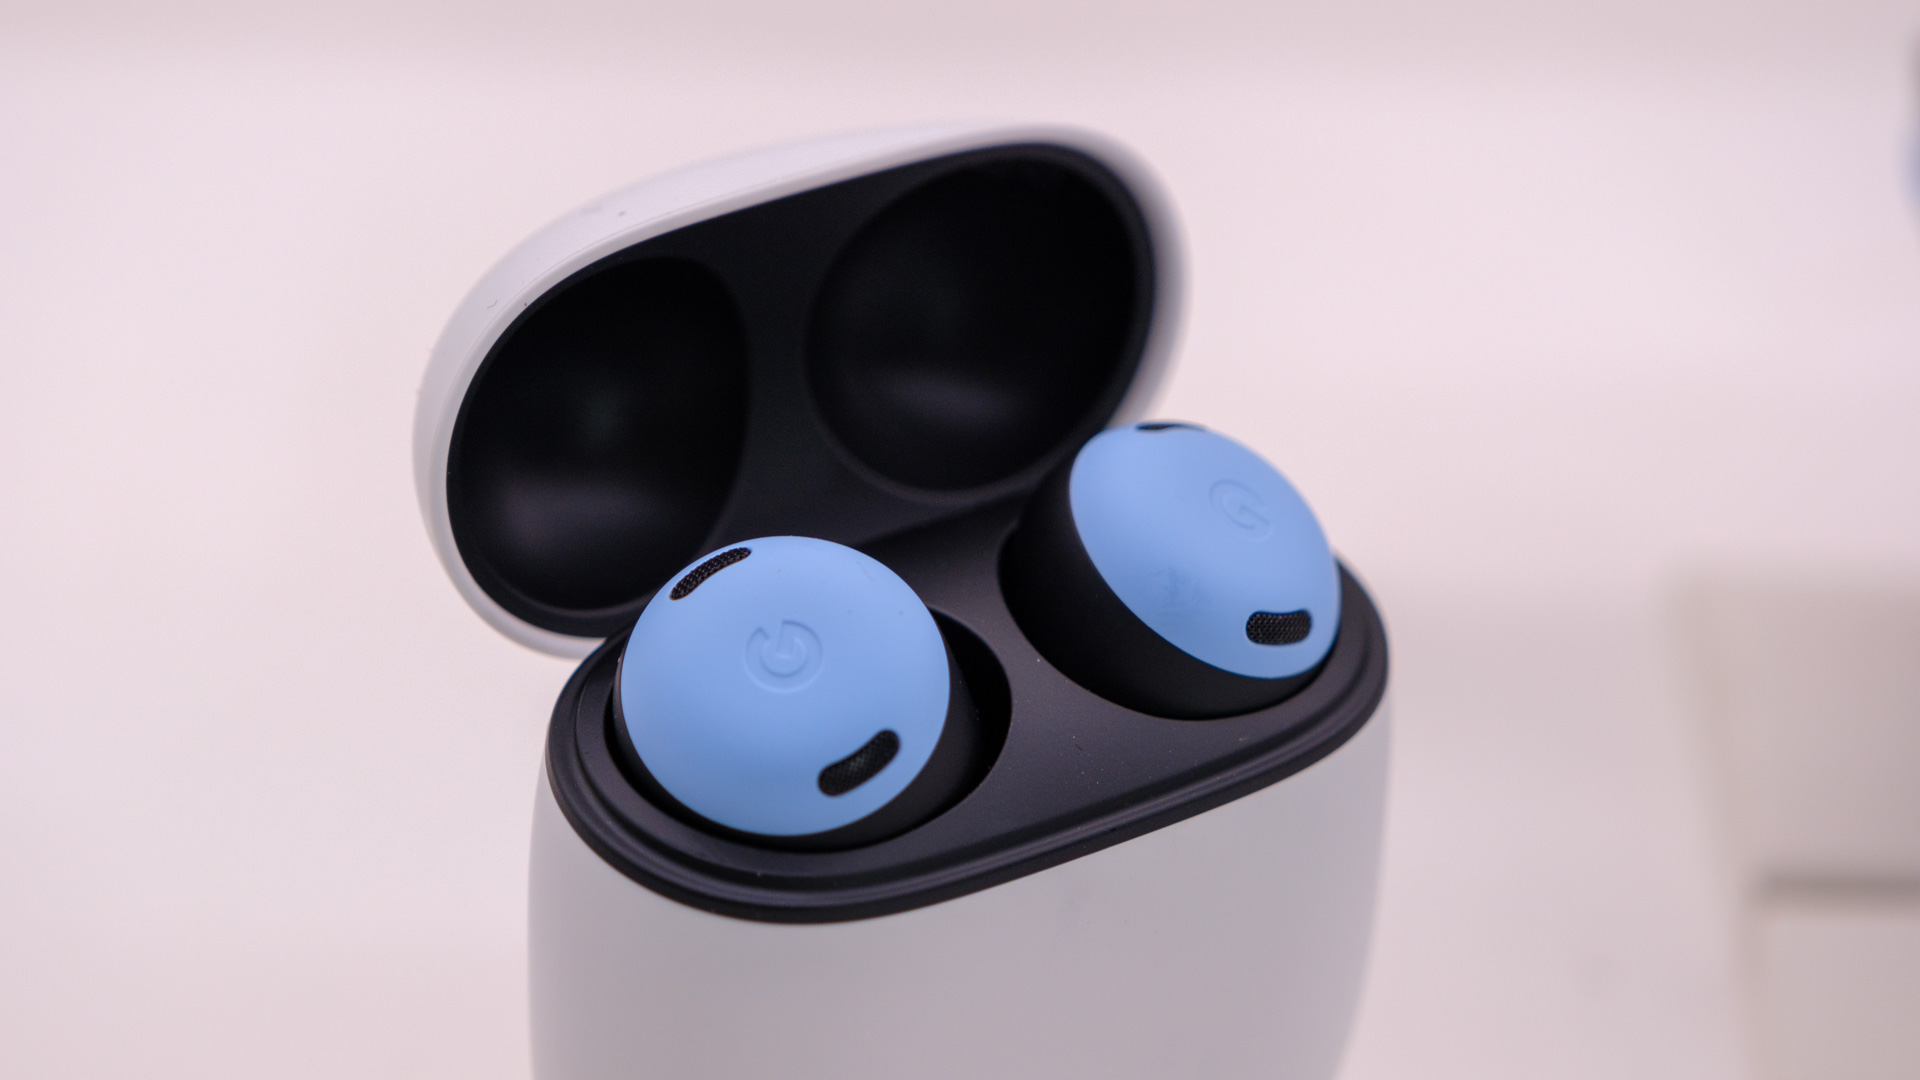 Google Pixel Buds Pro vs Pixel Buds A-Series - Android Authority